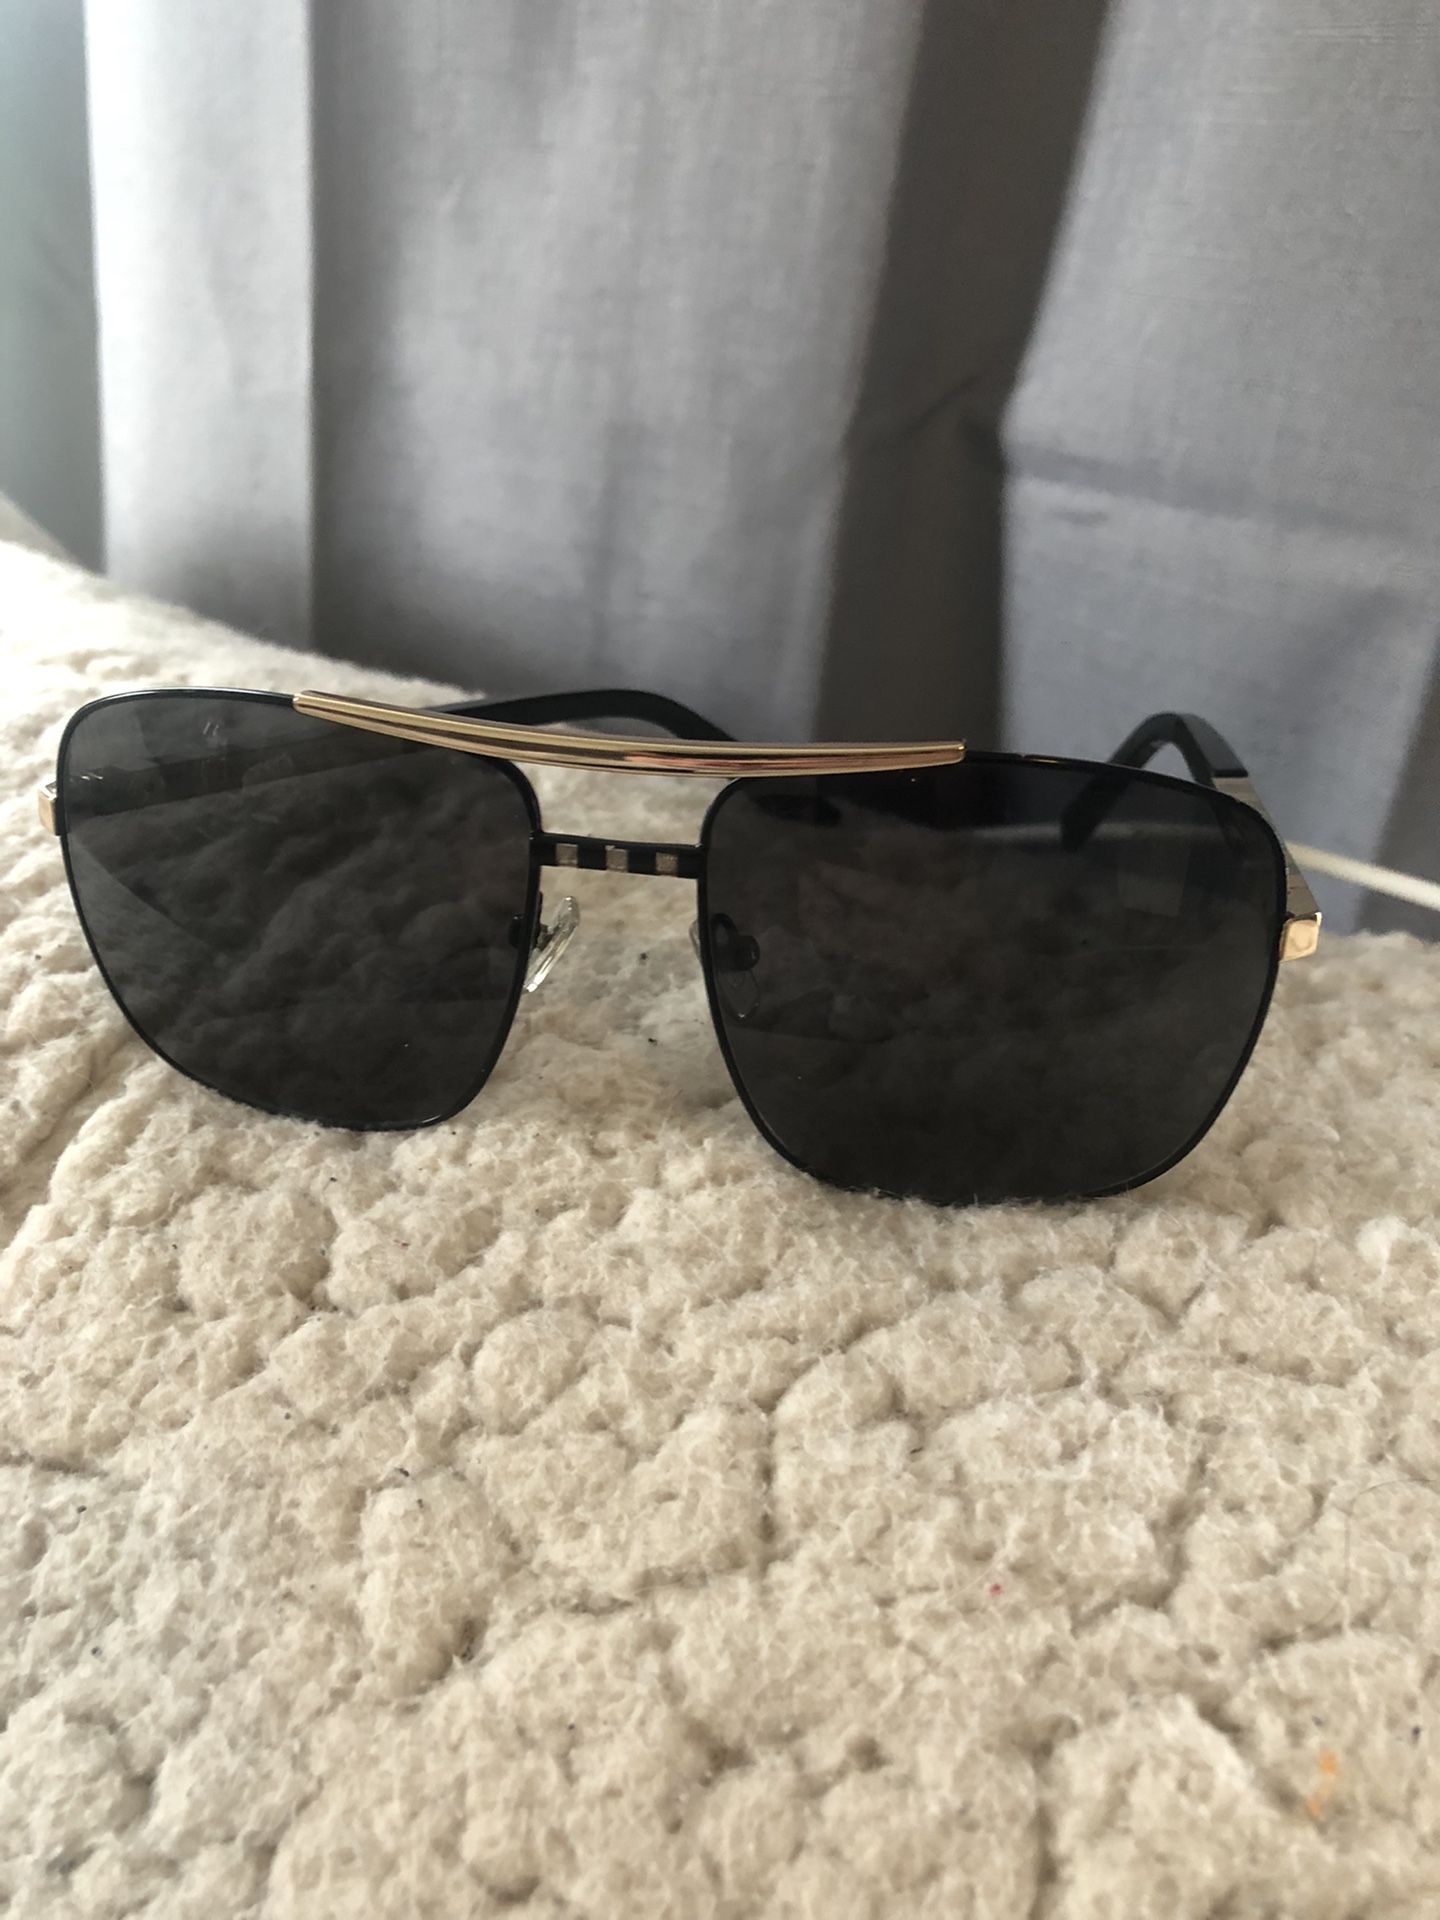 Louis Vuitton Attitude Pilot Sunglasses Missing 1 Nose Rubber for Sale in  Queens, NY - OfferUp